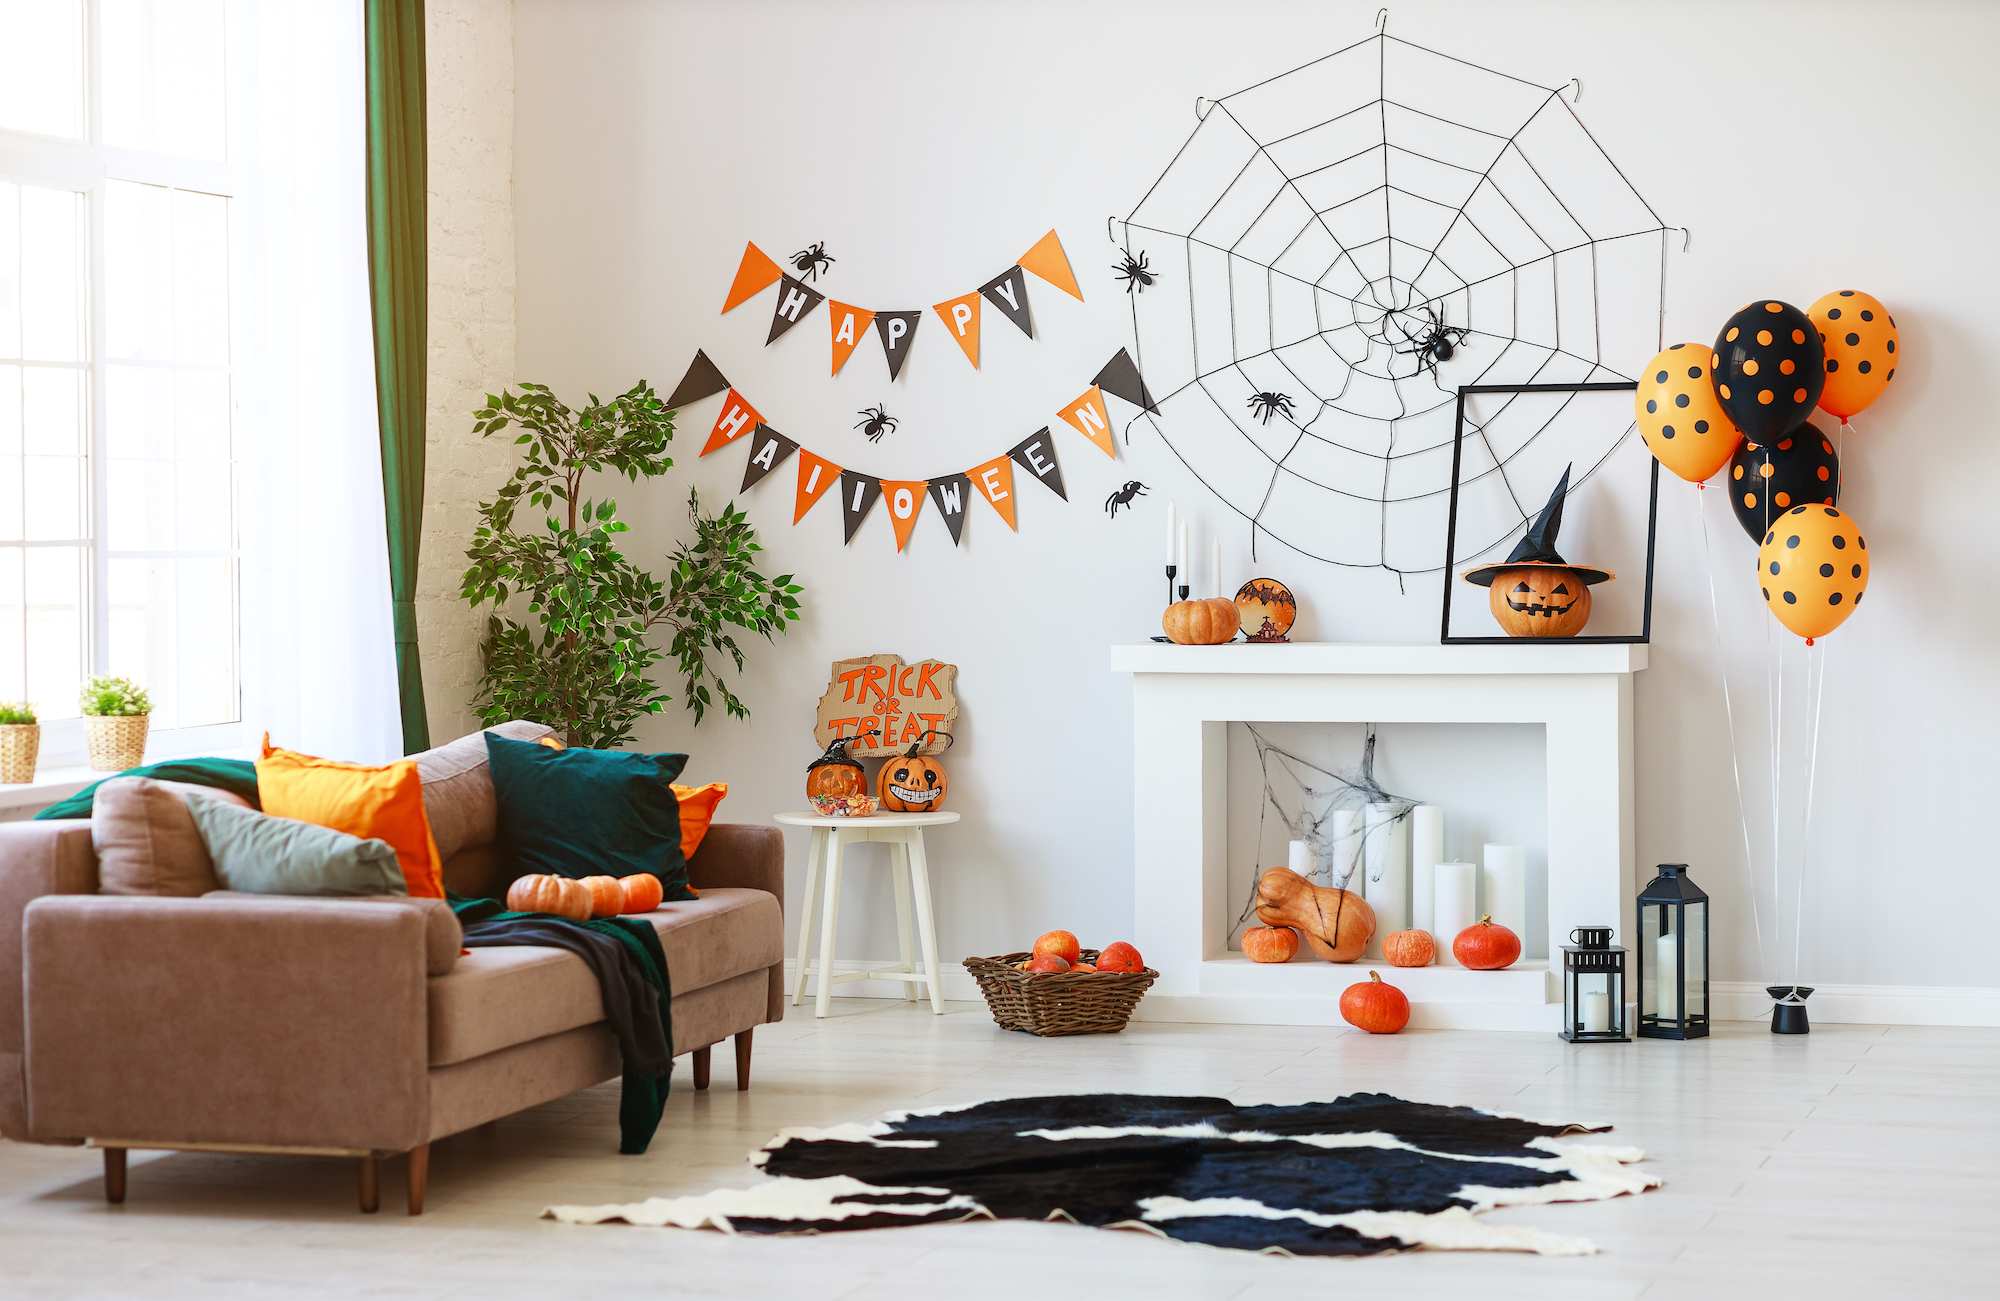 Target Has Seriously Fun and Festive Halloween Decor and Costumes